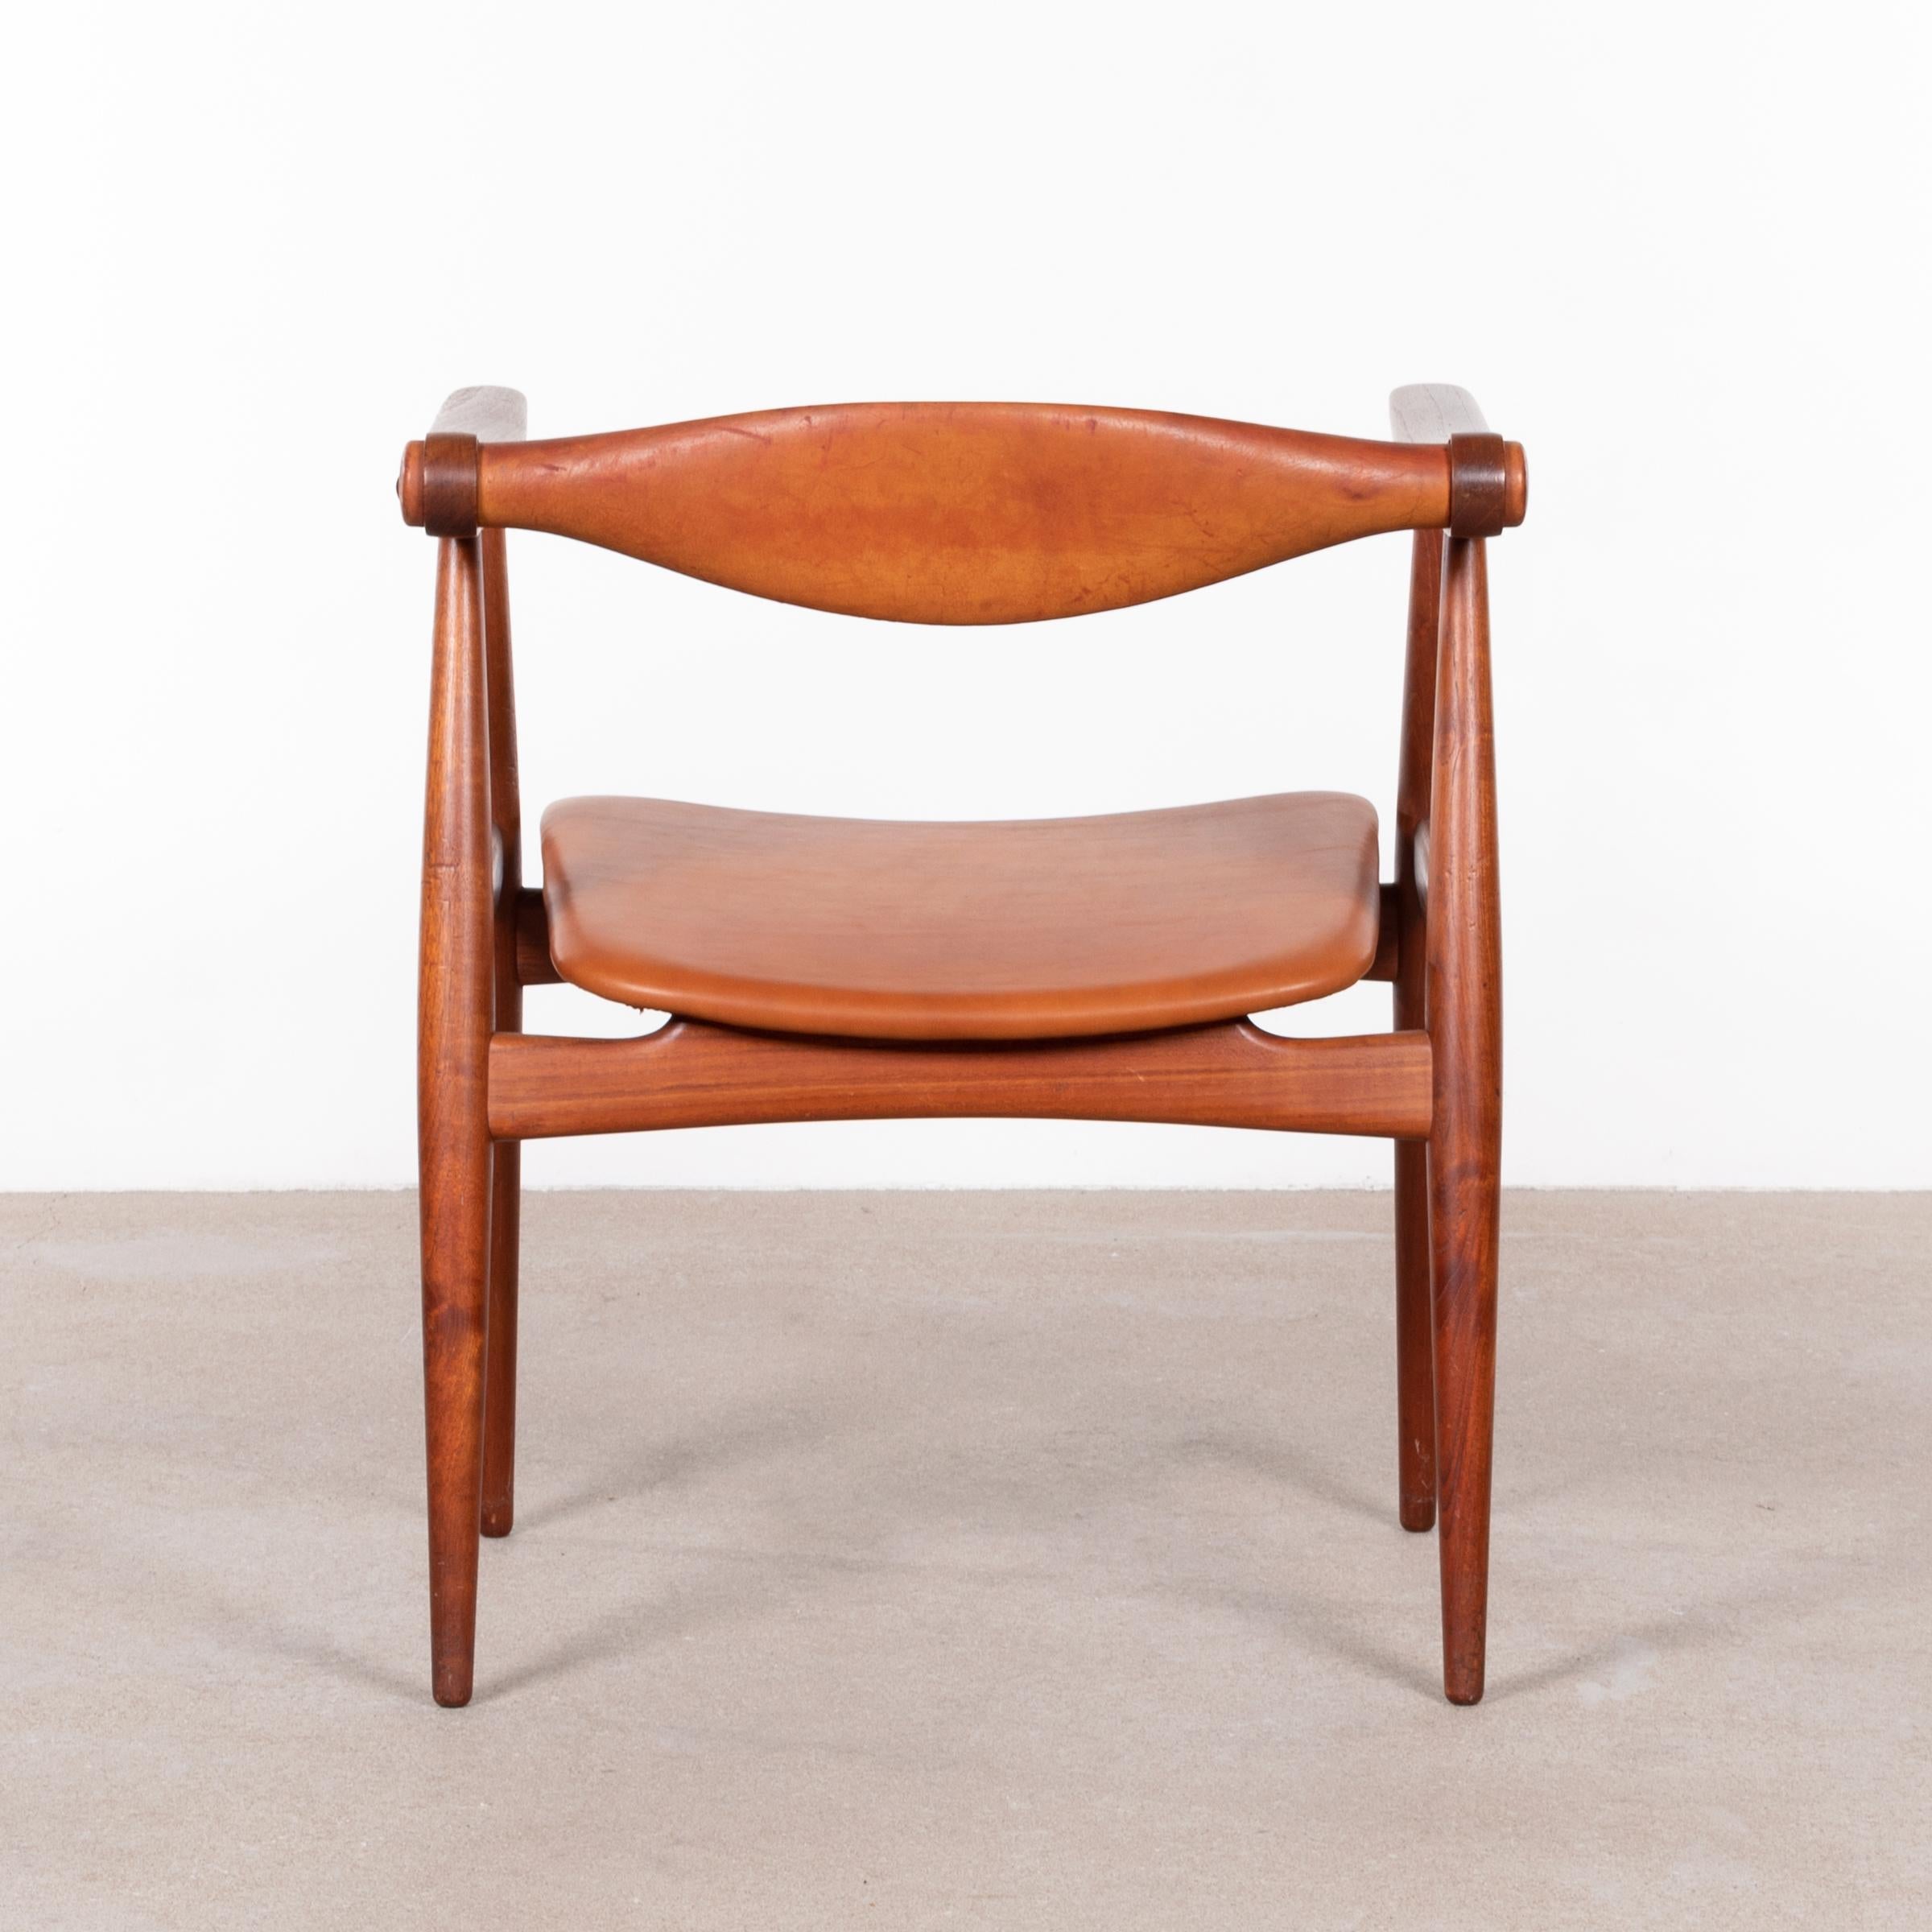 This beautiful Hans Wegner CH-34 chair has sculpted details with a smart adjustable back rest. Produced by Carl Hansen & Søn with teak frame and cognac leather upholstery. Light traces of use mainly on the wooden frame and back rest.